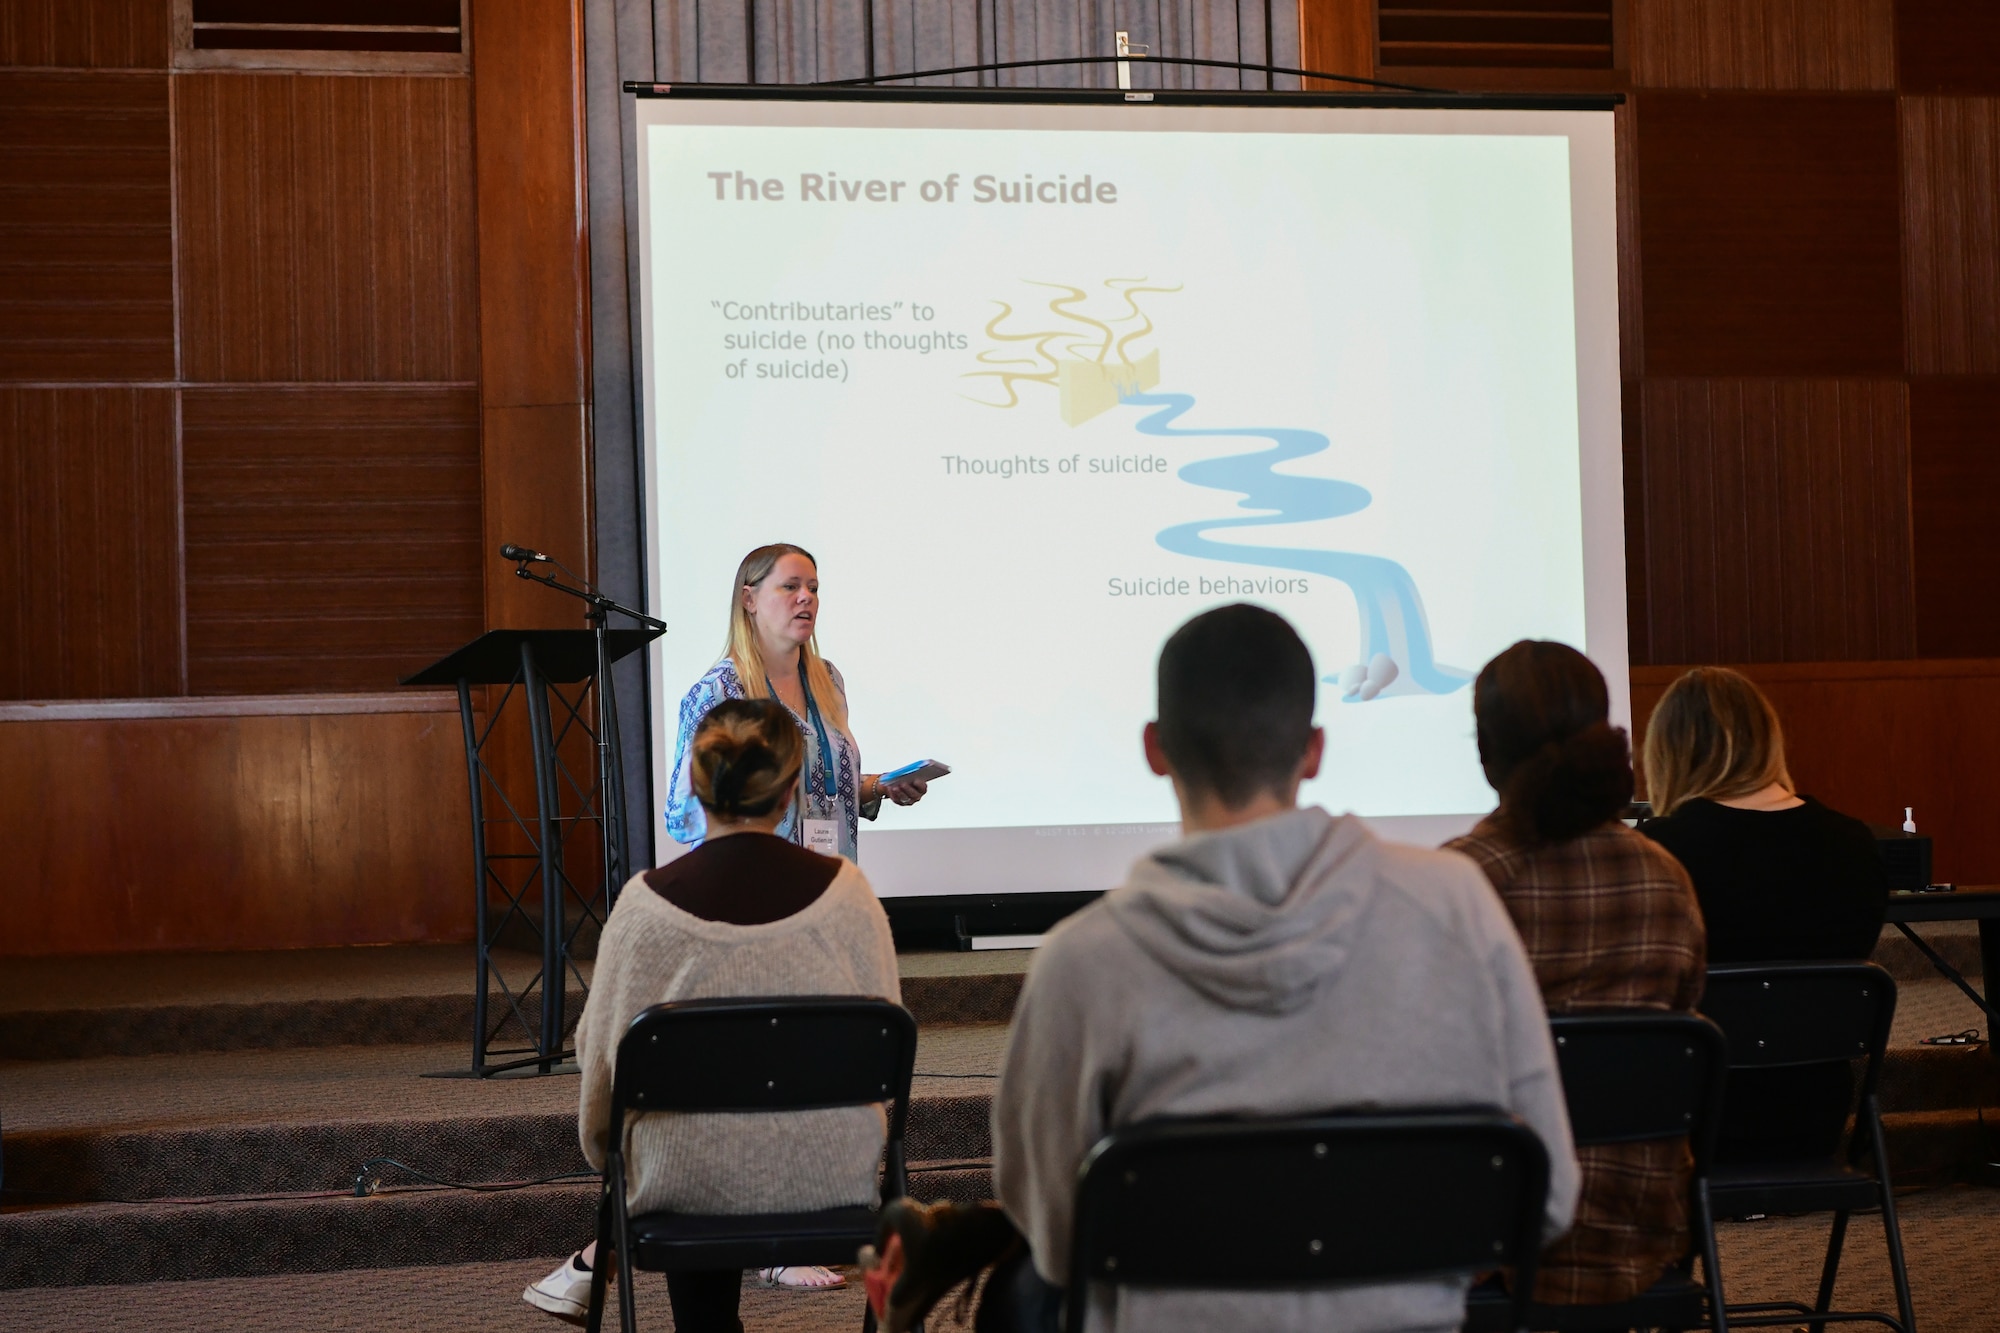 Tech. Sgt. Laura Gutierrez, Applied Suicide Intervention Skills Training (ASIST) instructor, teaches Airmen suicide prevention skills during the ASIST program held in the base chapel at Beale Air Force Base, Calif., on Sept. 22, 2022